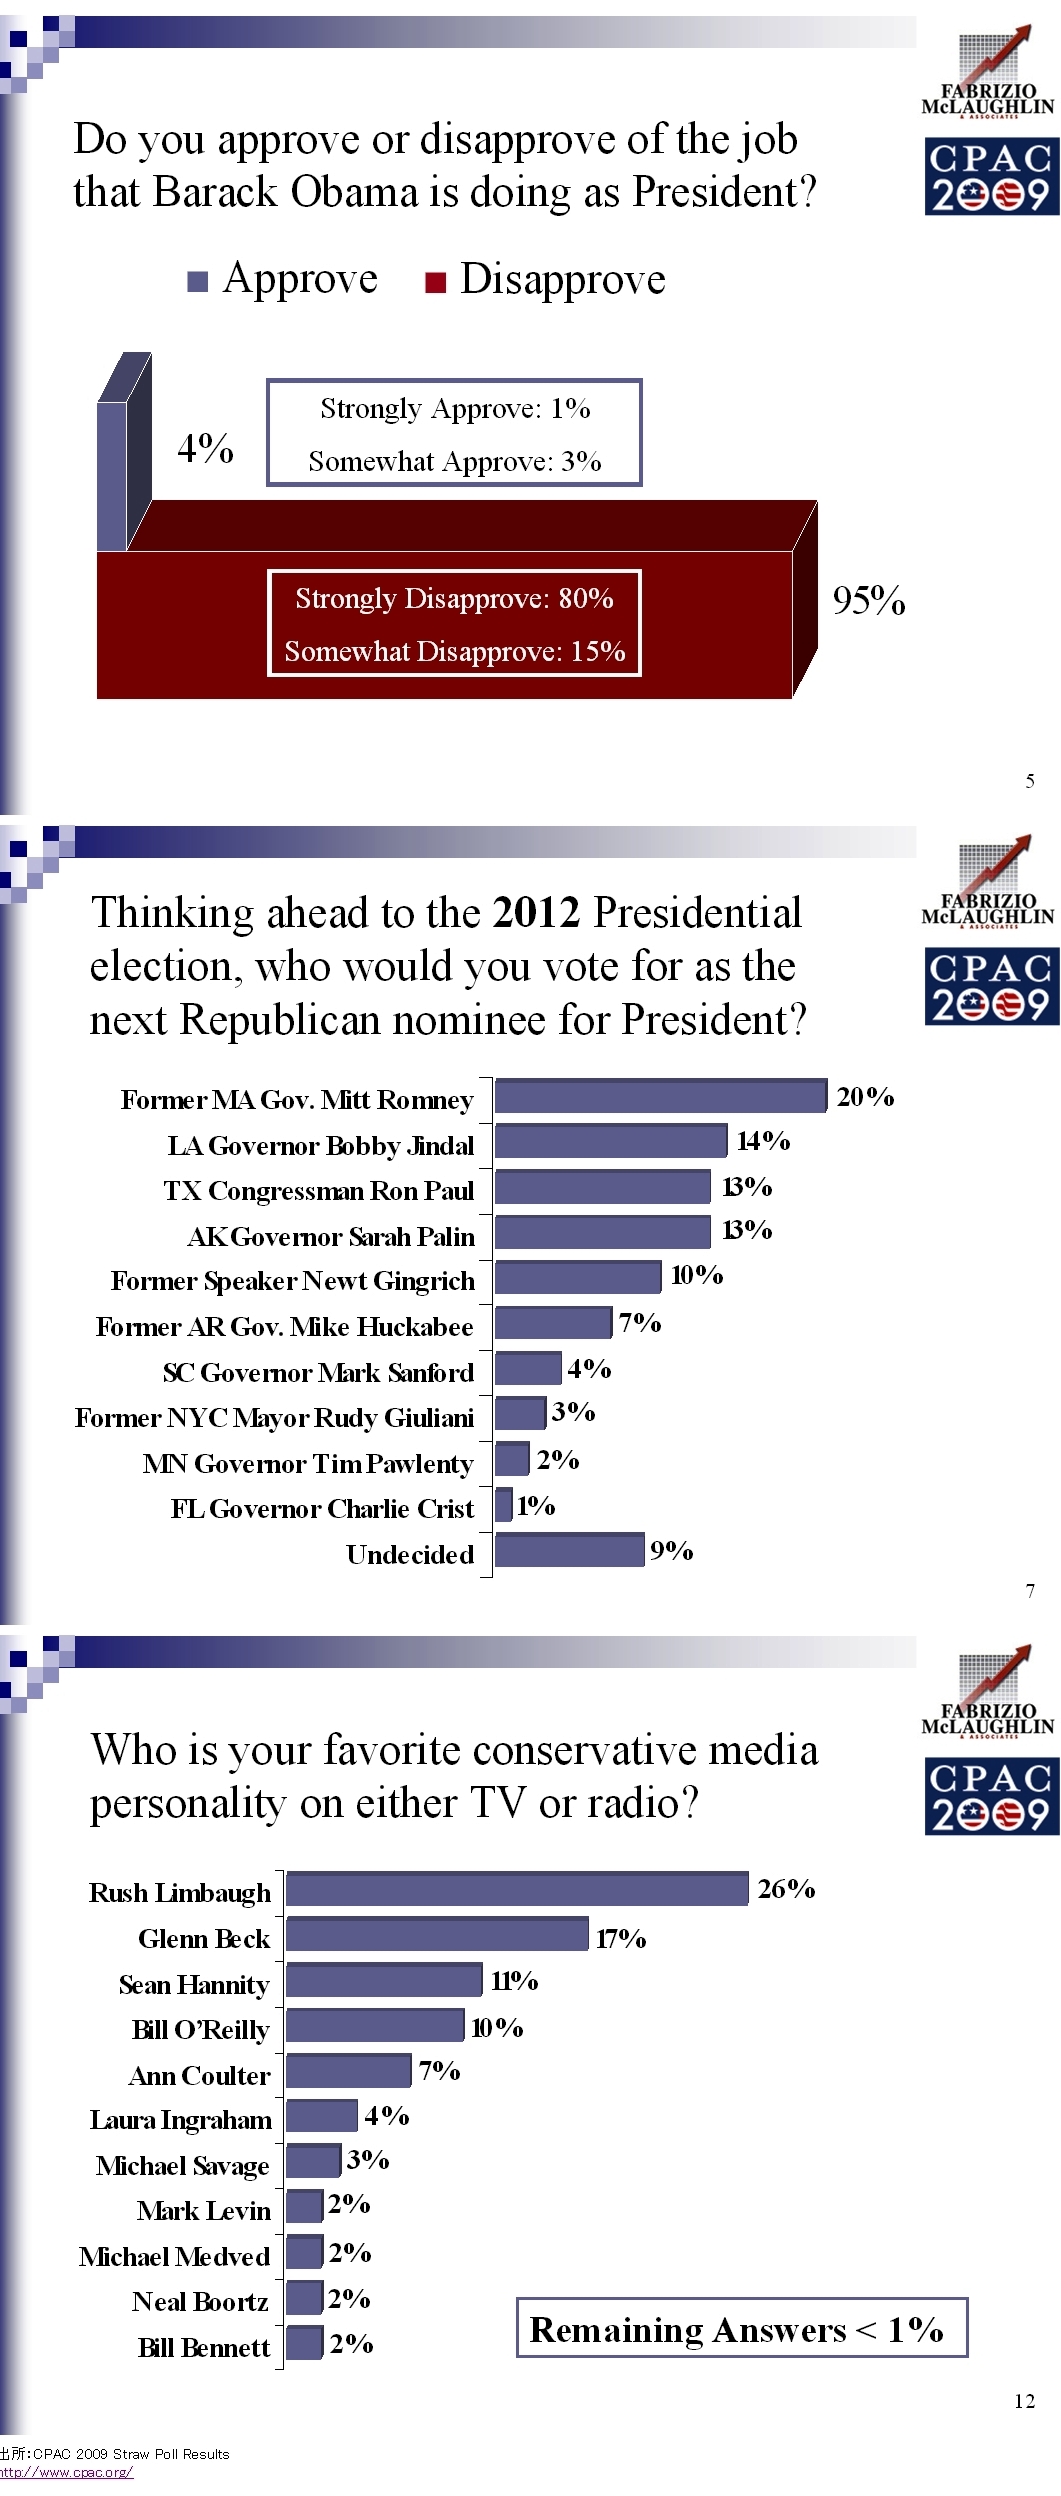 CPAC 2009 Straw Poll Results